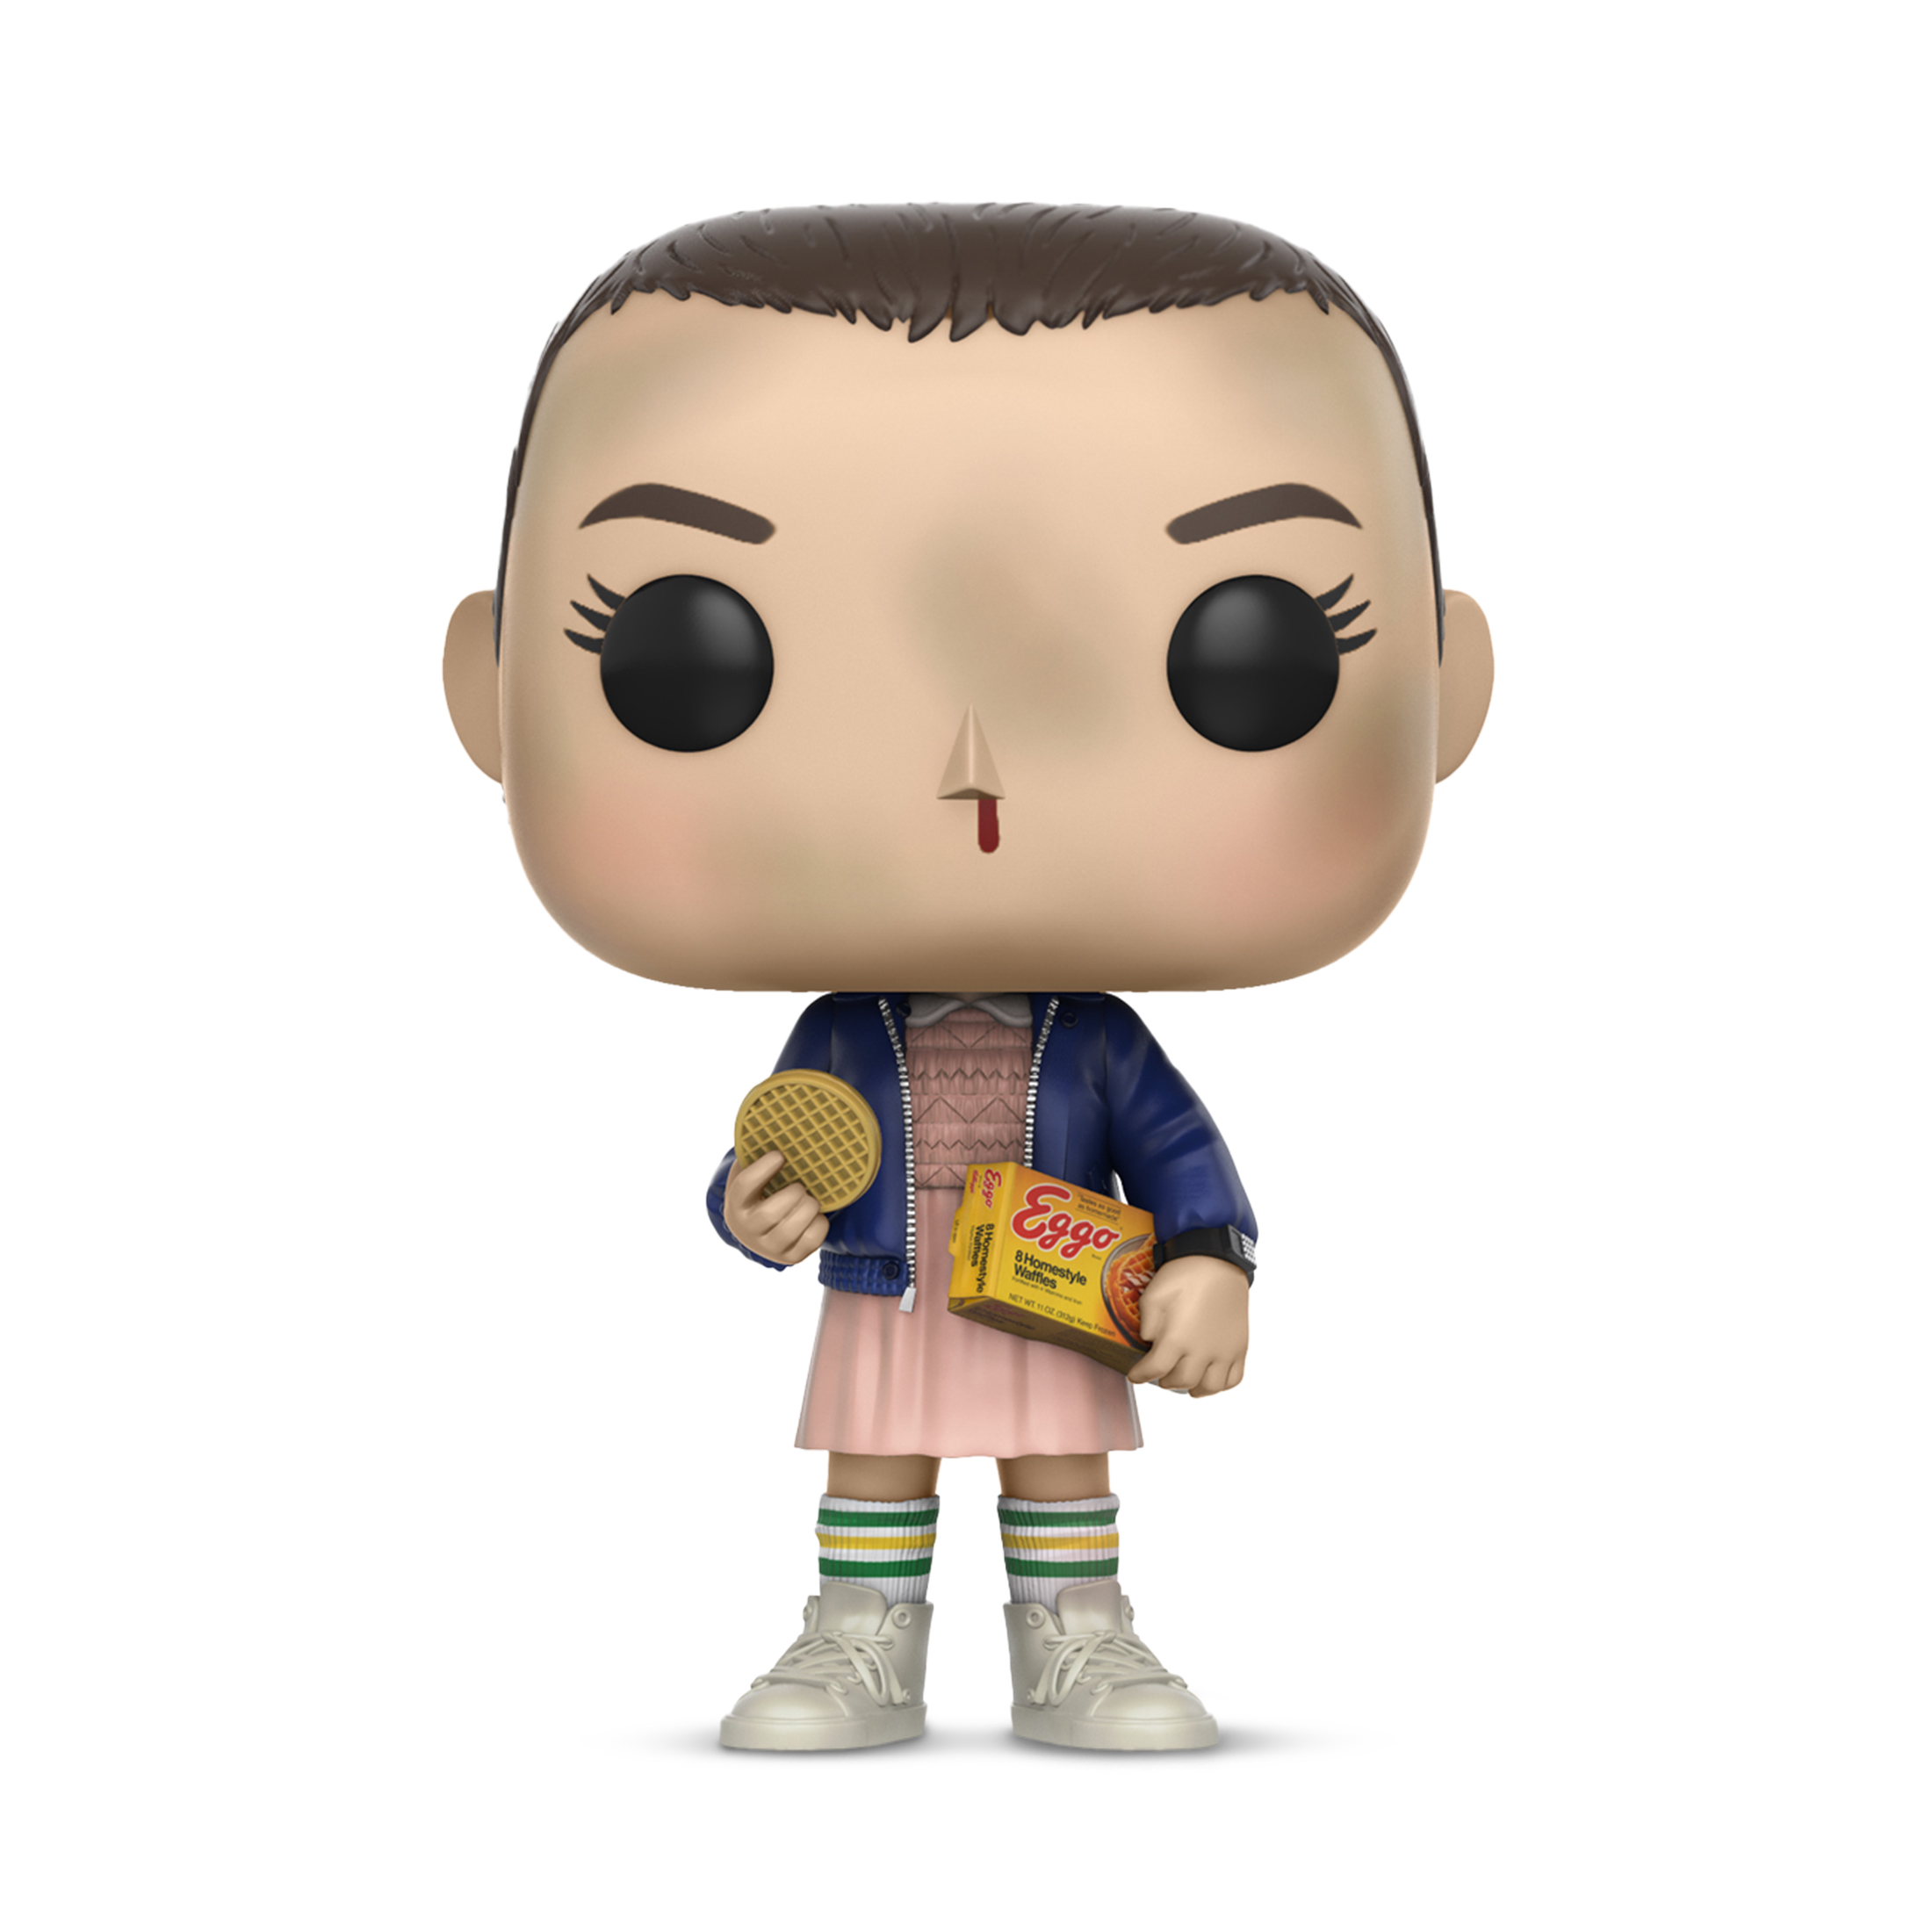 Chromecast with Google TV (4K) Streaming Media Player - with Funko POP! TV Stranger Things Eleven with Eggos - image 8 of 10